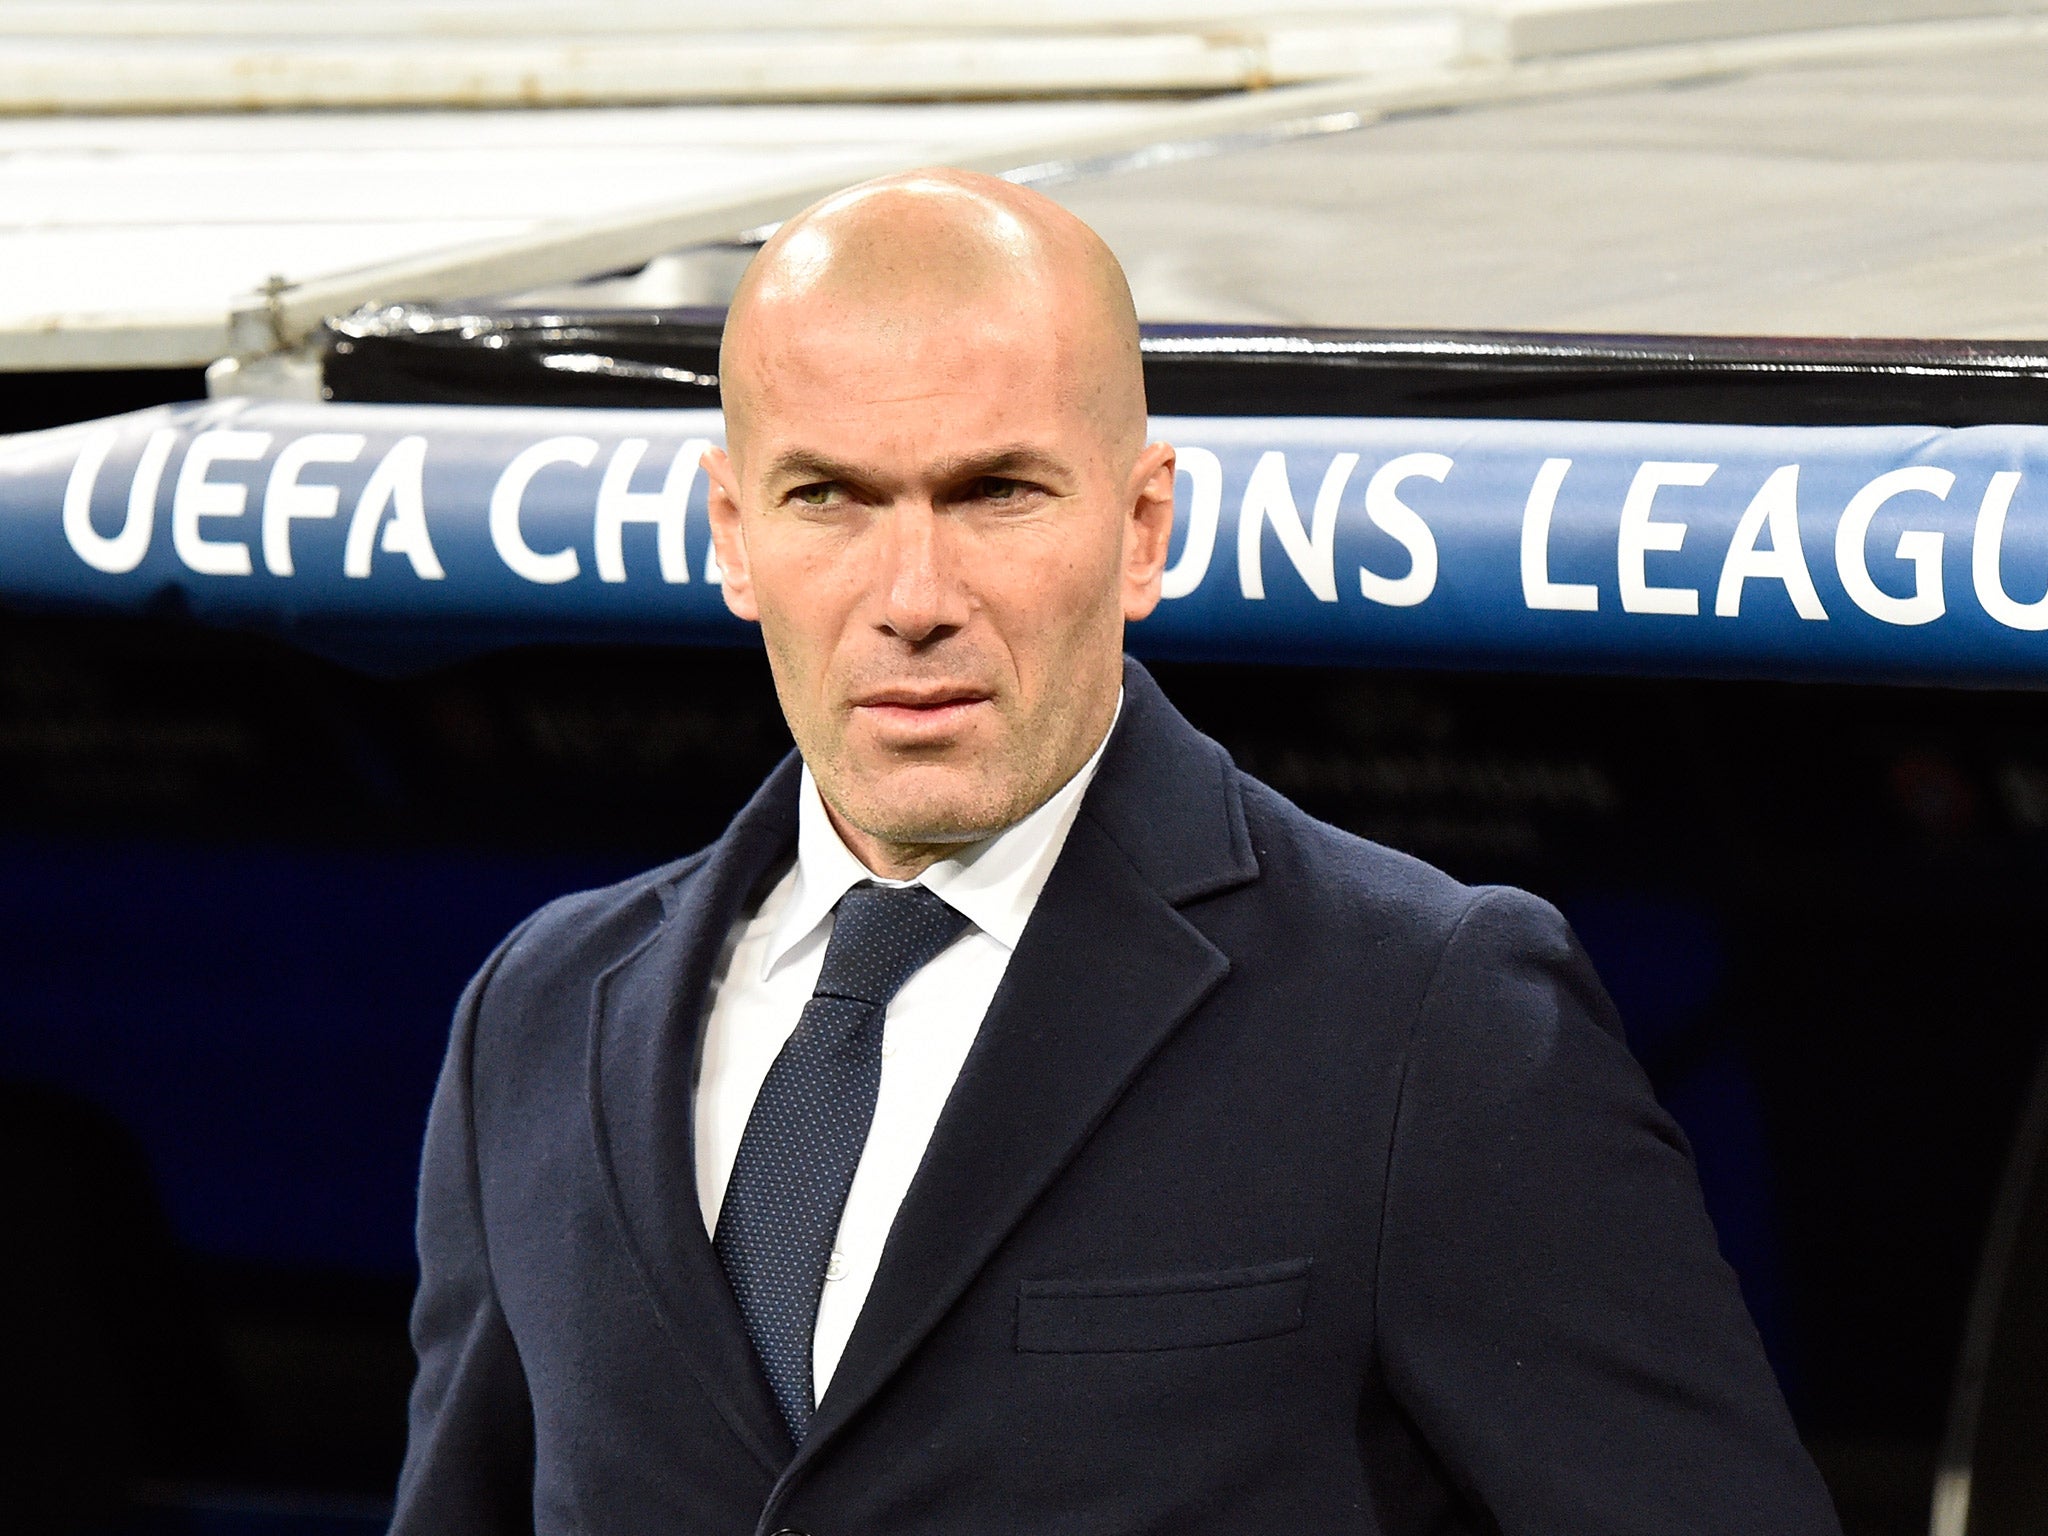 Real Madrid manager Zinedine Zidane will take charge of his first El Clasico